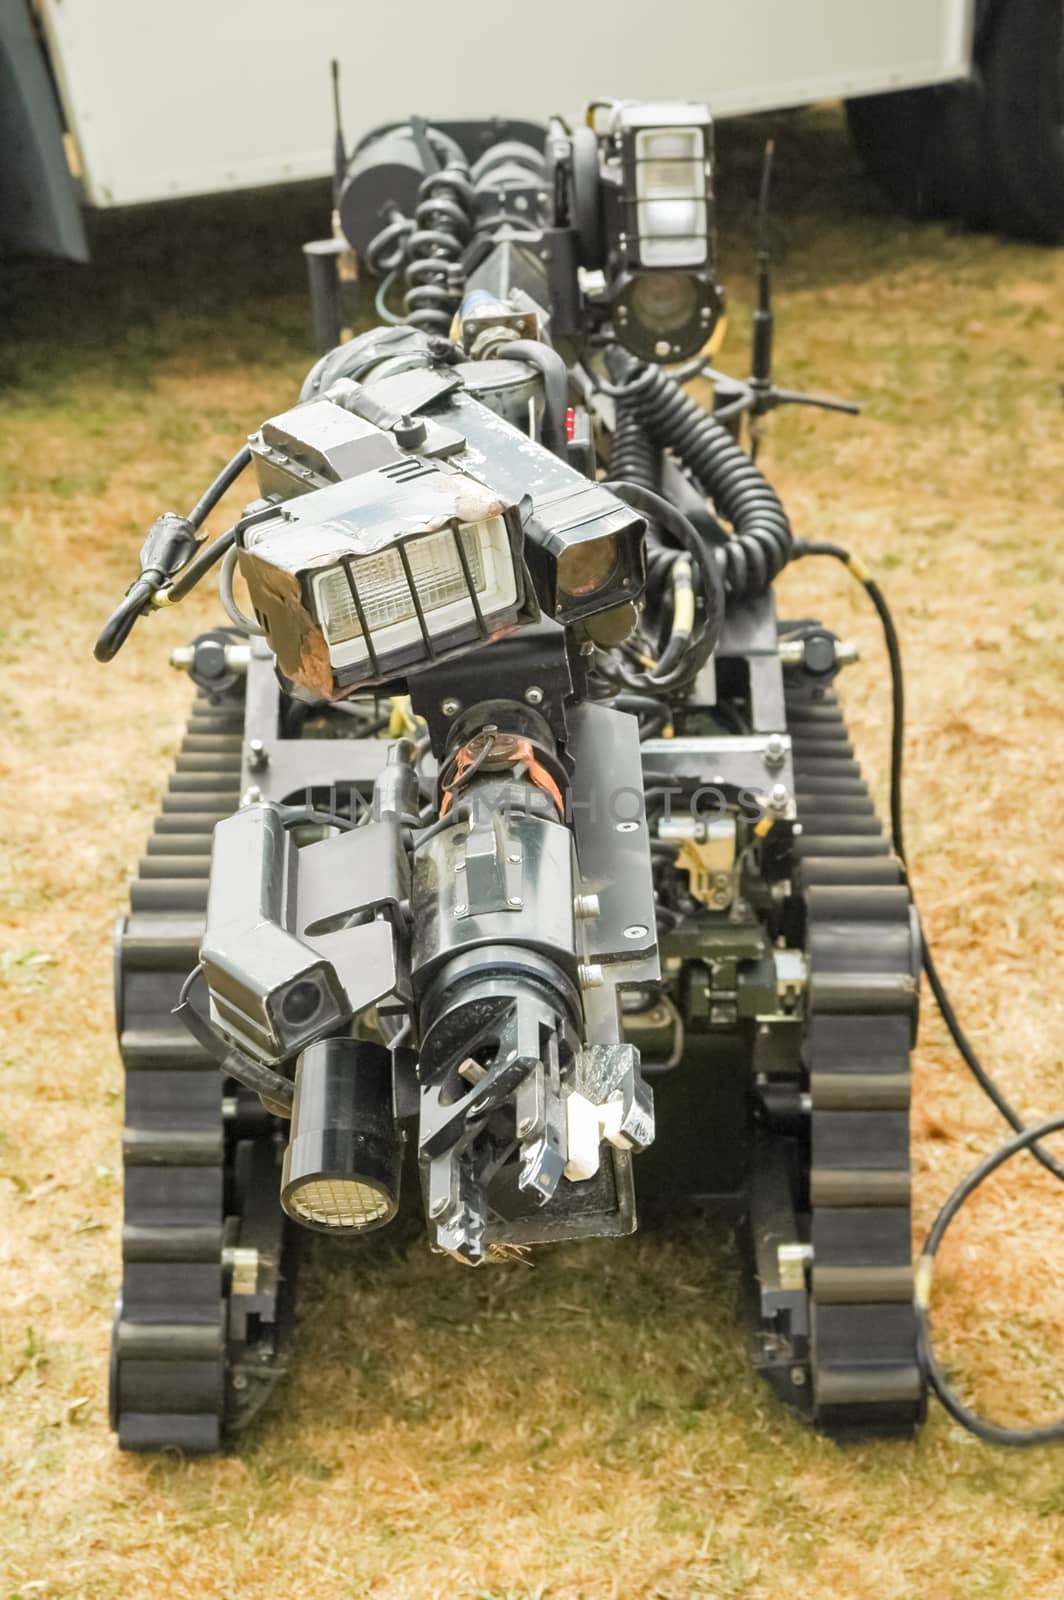 remote control bomb disposal robot used by the military